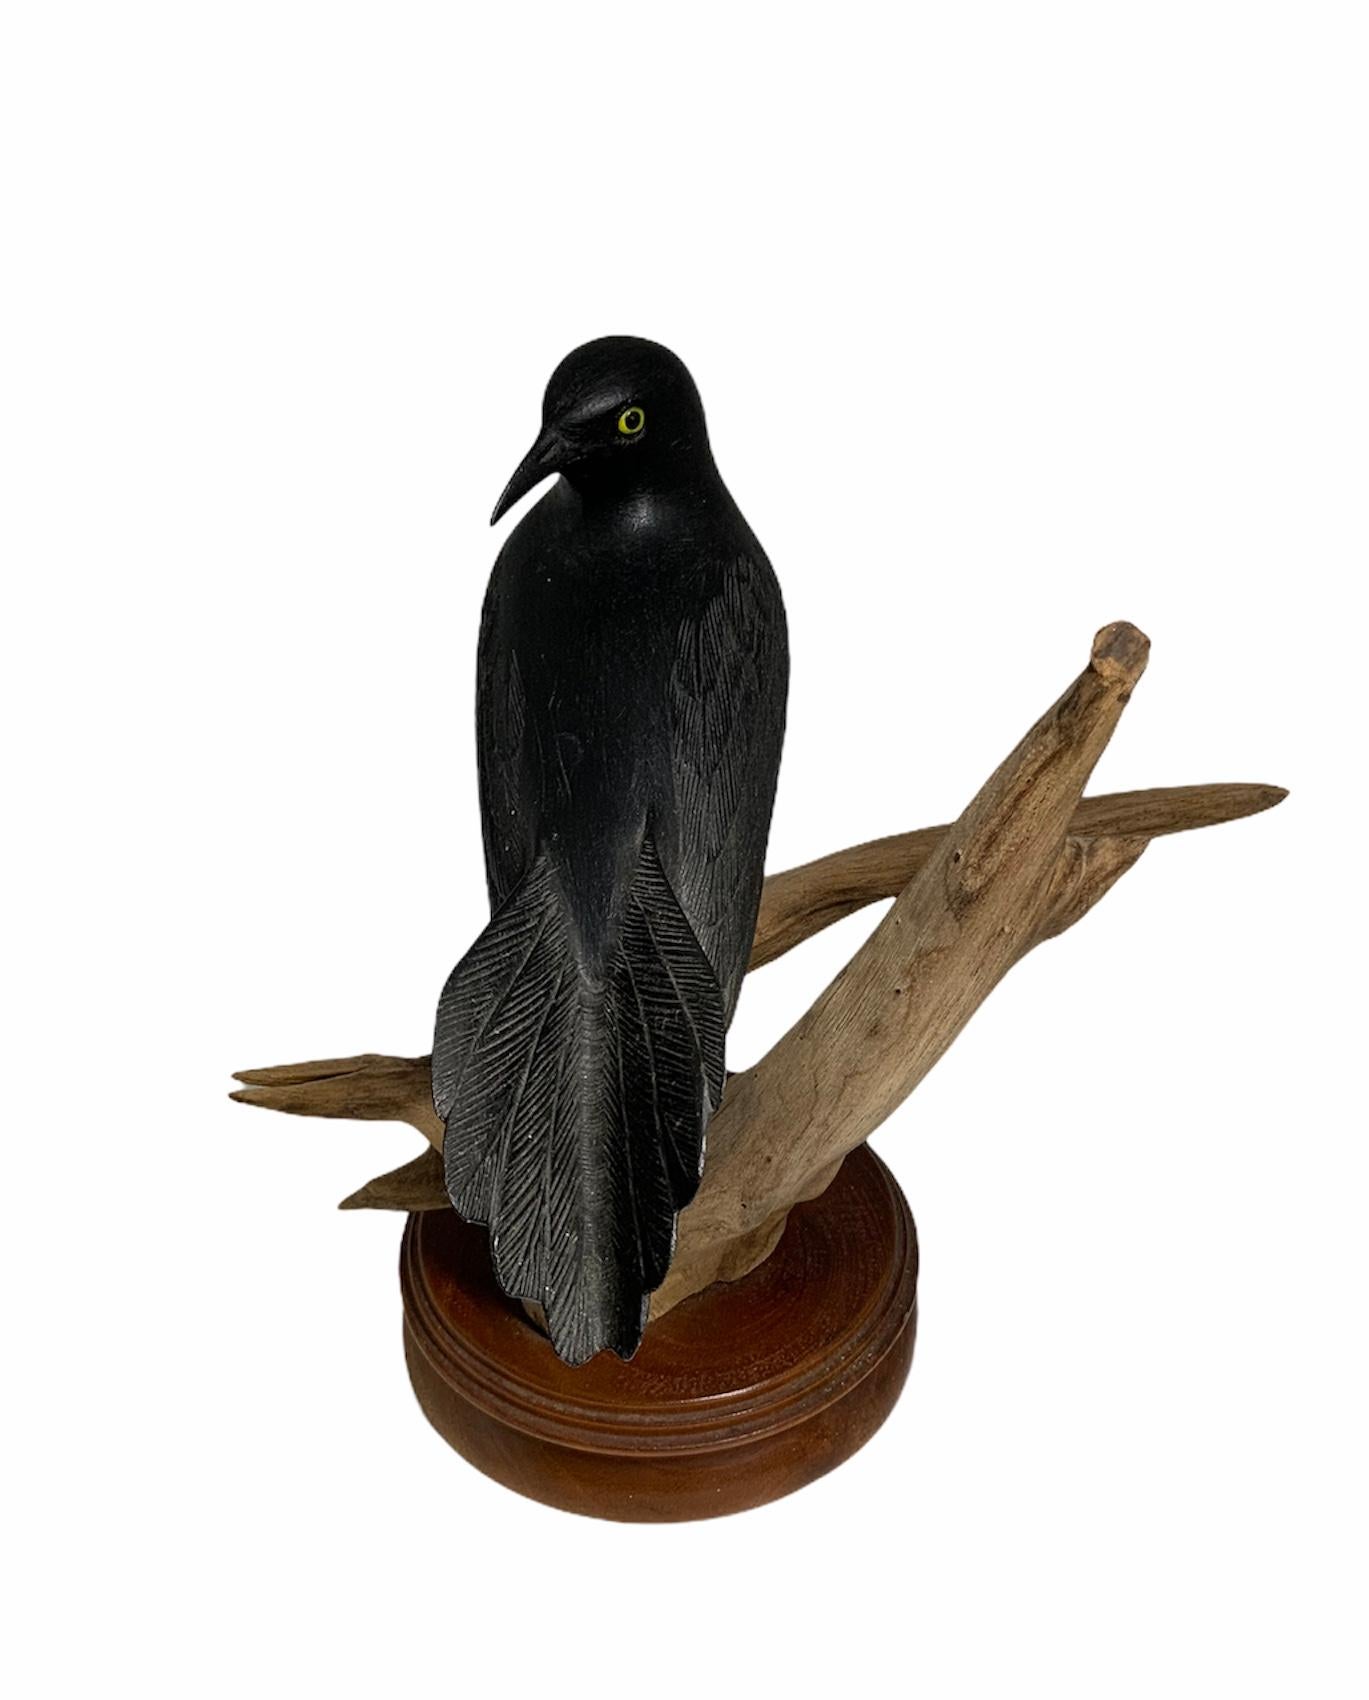 Arts and Crafts Puerto Rican Hand Carved Wood “Greater Antillean Grackel” Bird Sculpture